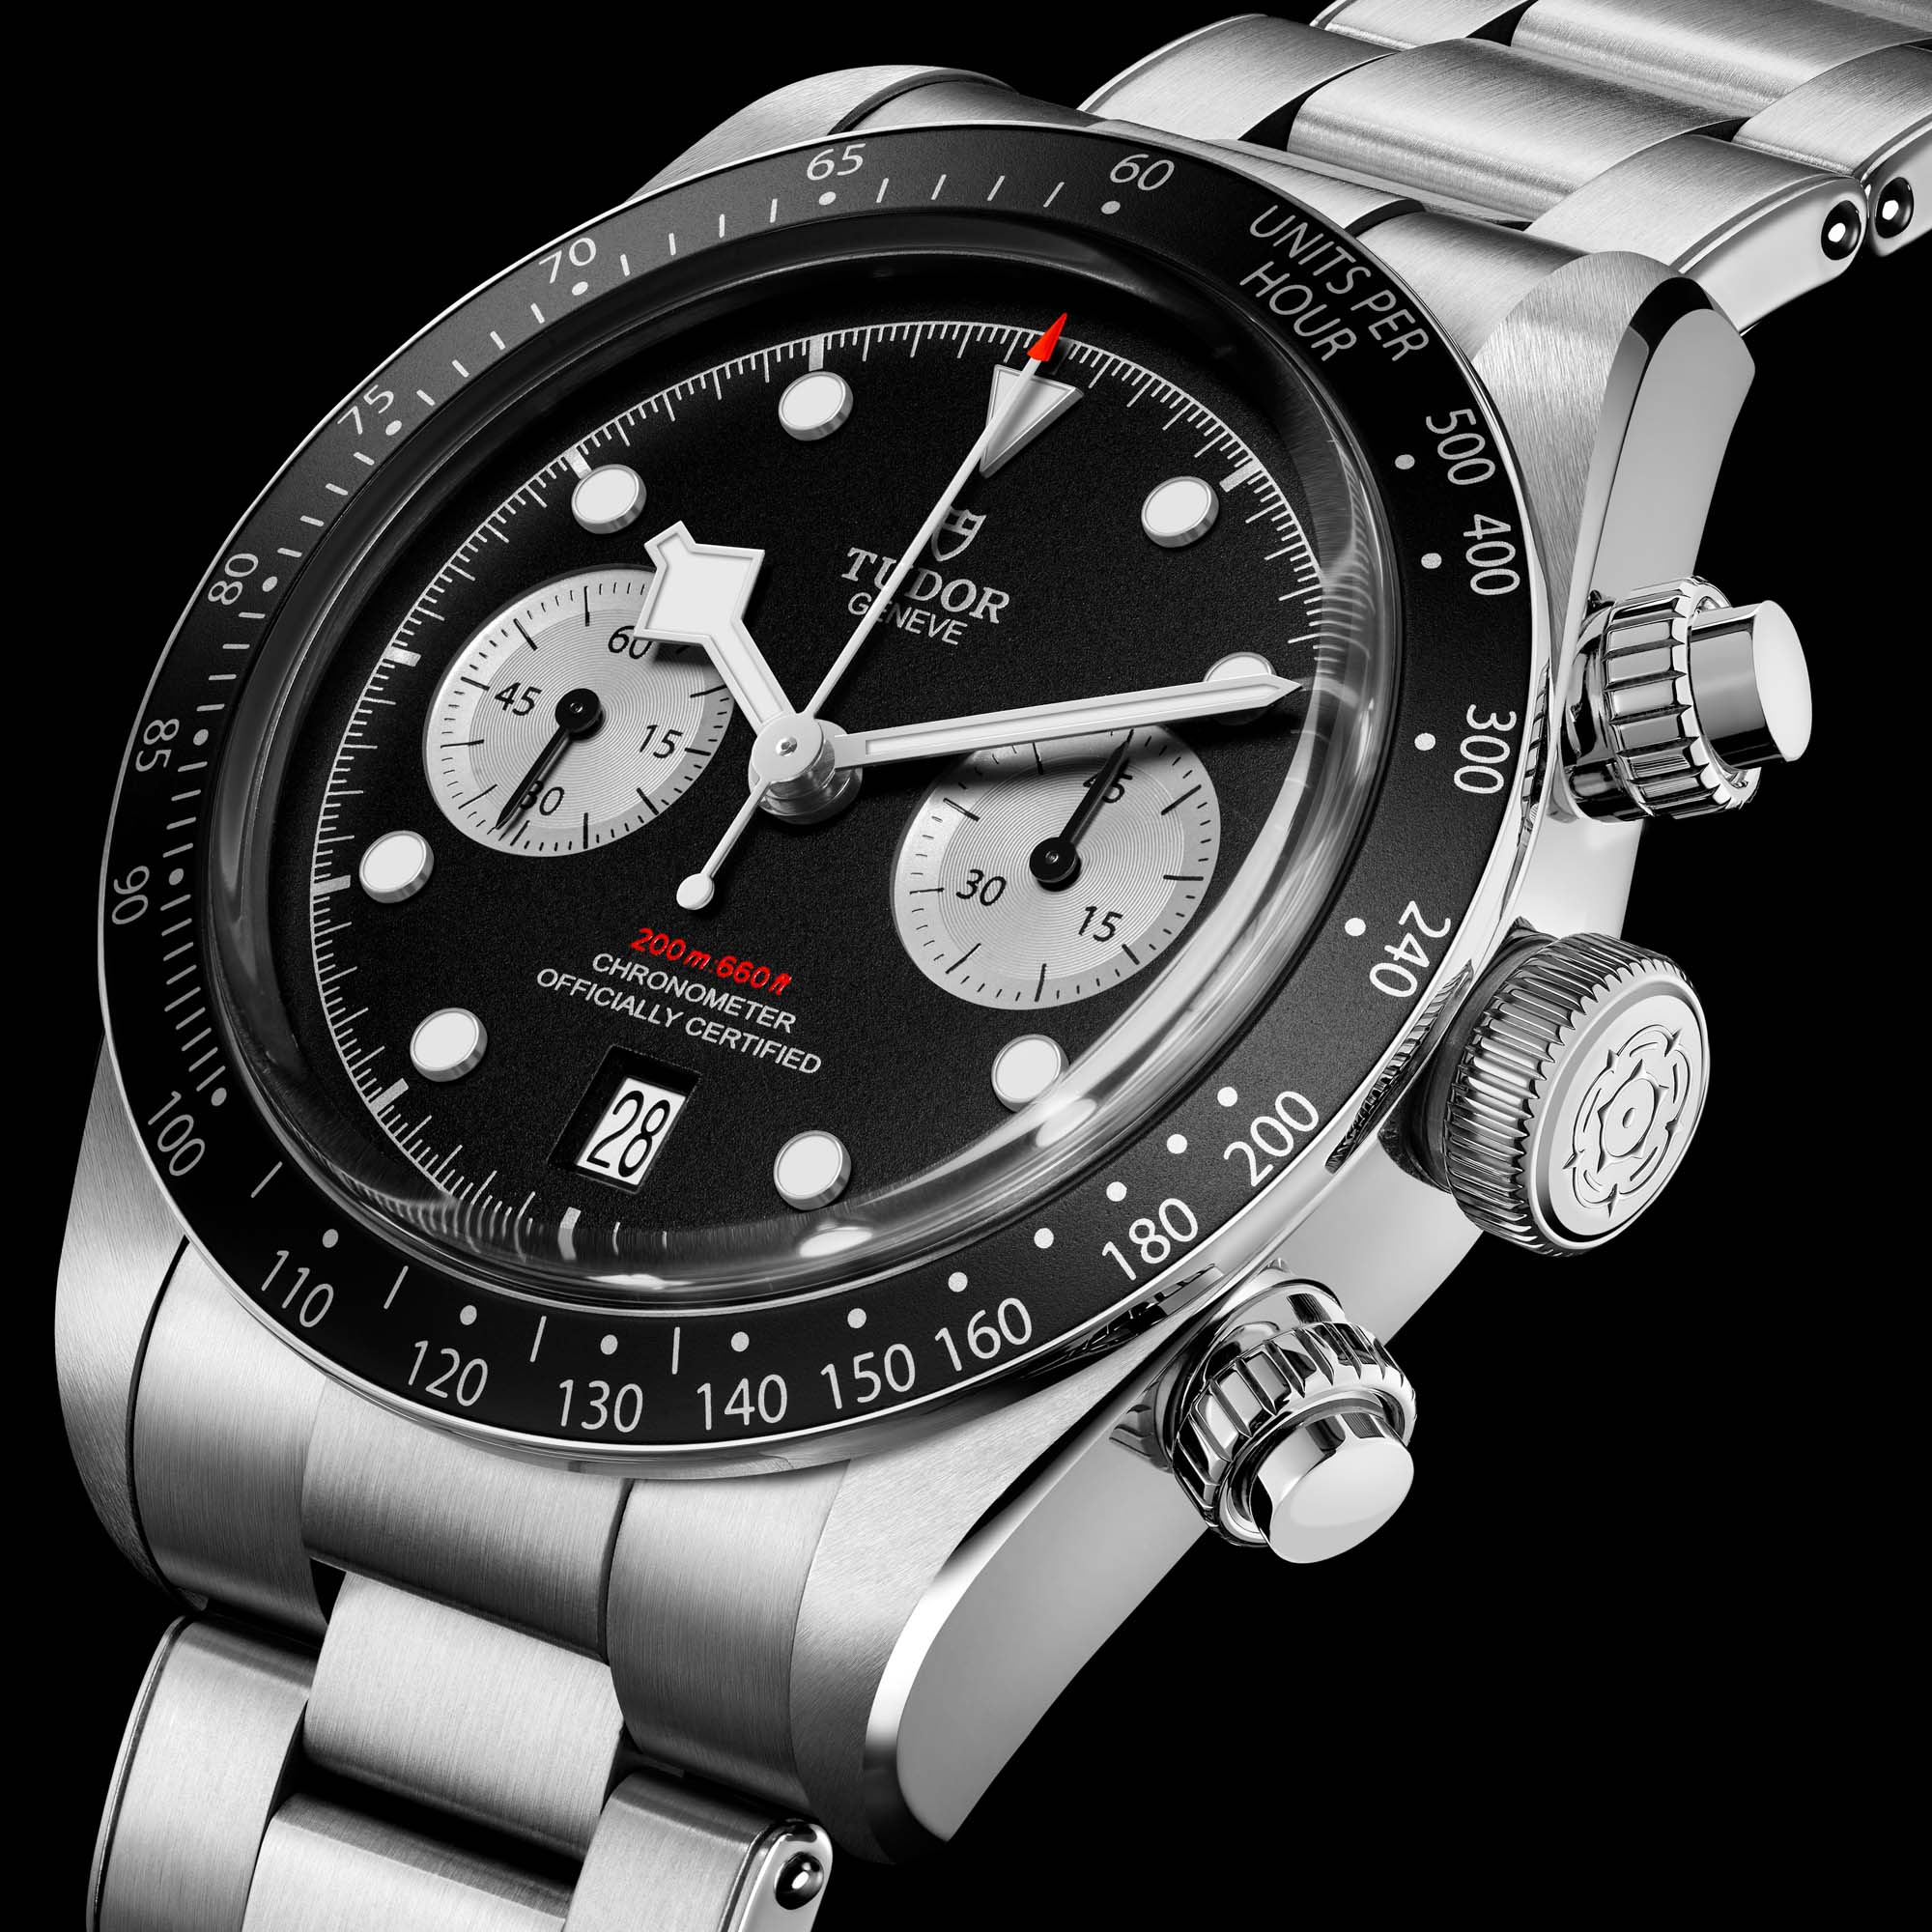 Tudor Black Bay Chrono Watch Gets Updated Looks For 50th Anniversary